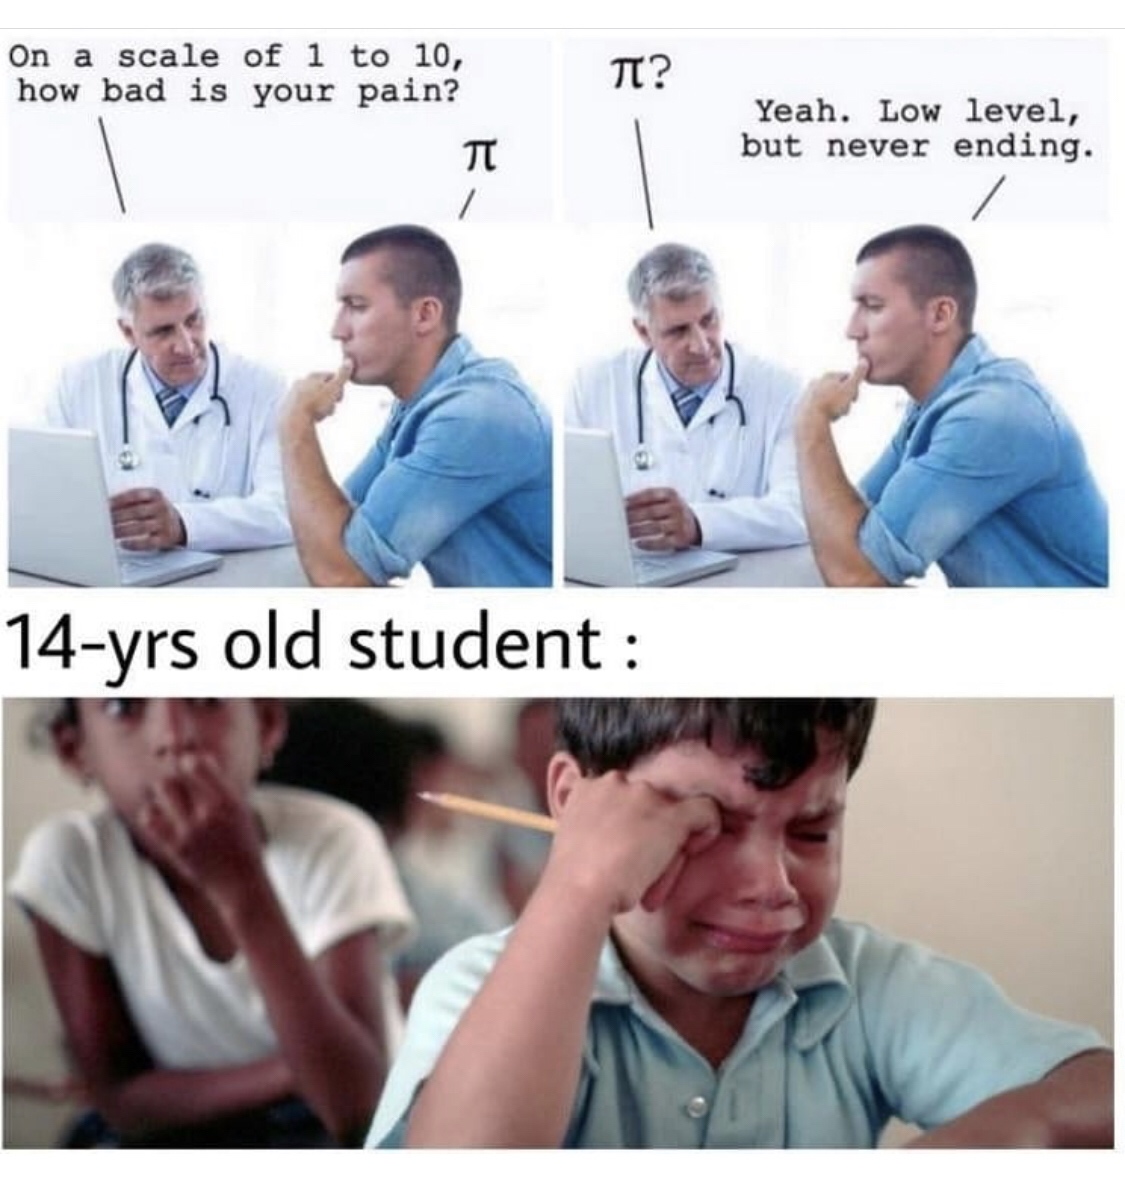 old student meme - On a scale of 1 to 10, how bad is your pain? T? Yeah. Low level, but never ending. 14yrs old student